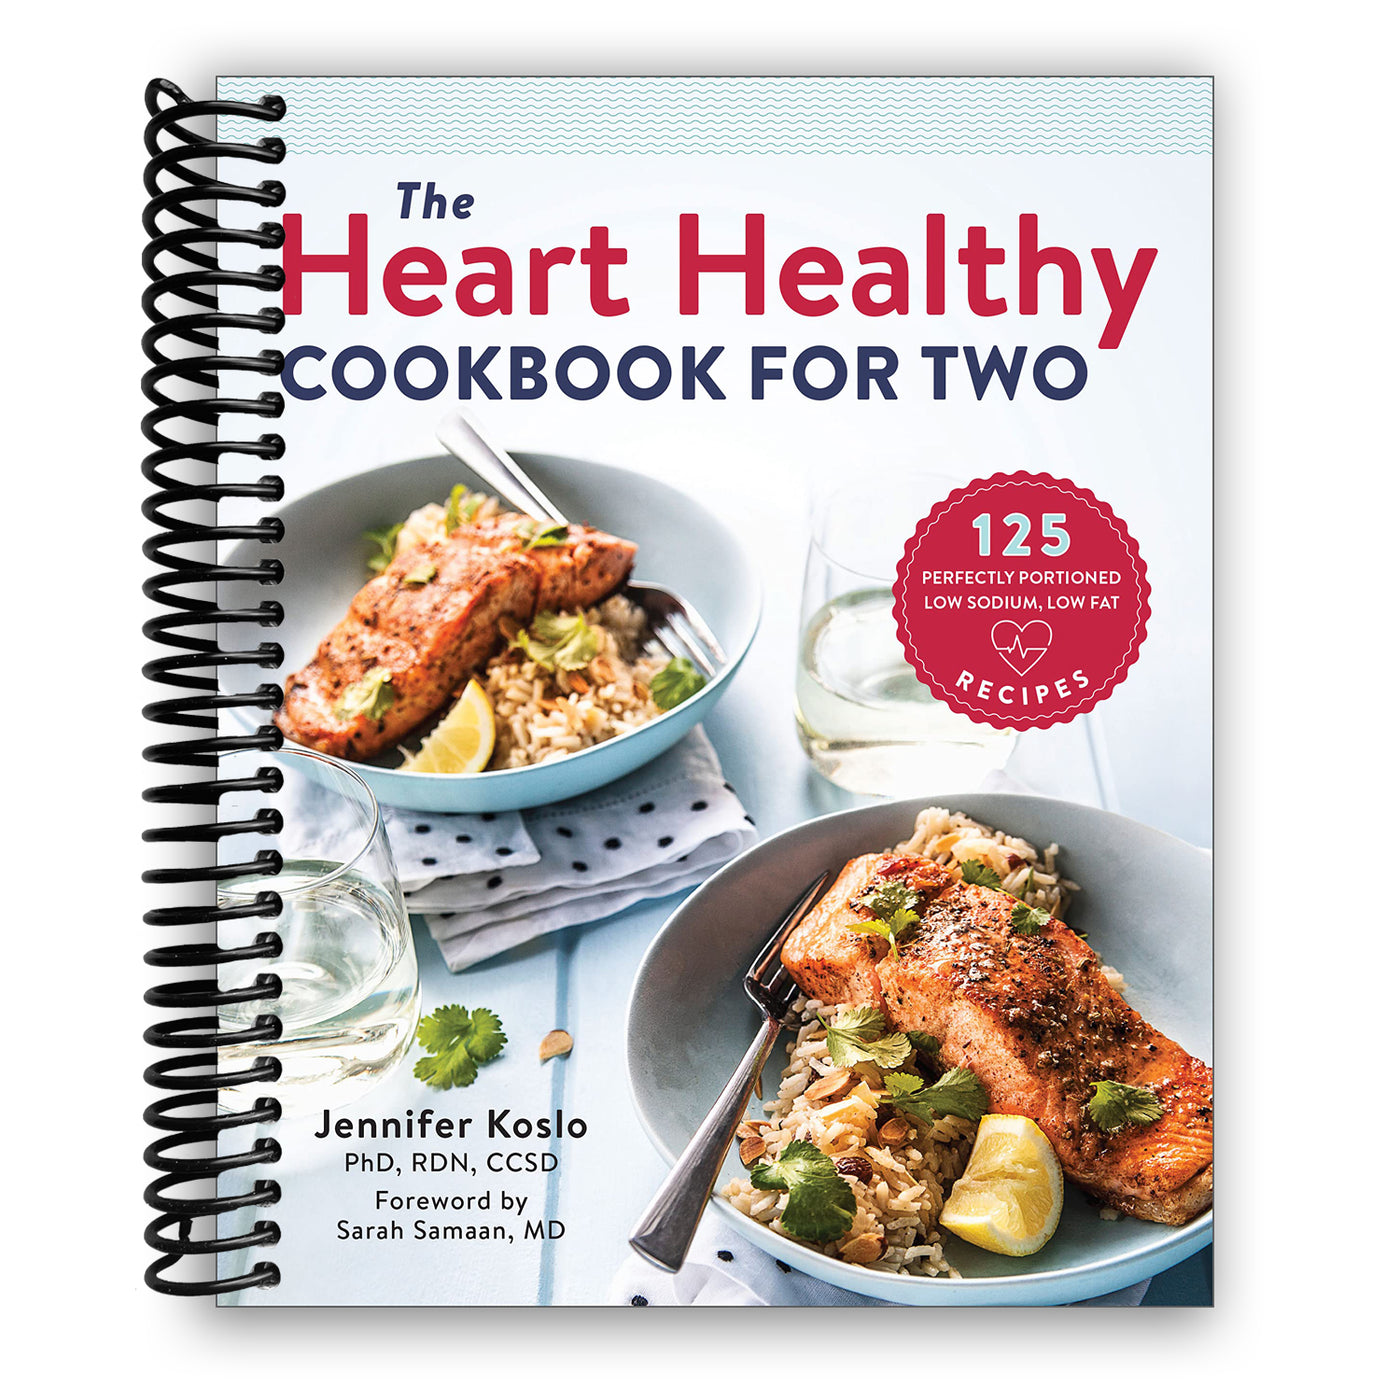 The Heart Healthy Cookbook for Two: 125 Perfectly Portioned Low Sodium, Low Fat Recipes (Spiral Bound)